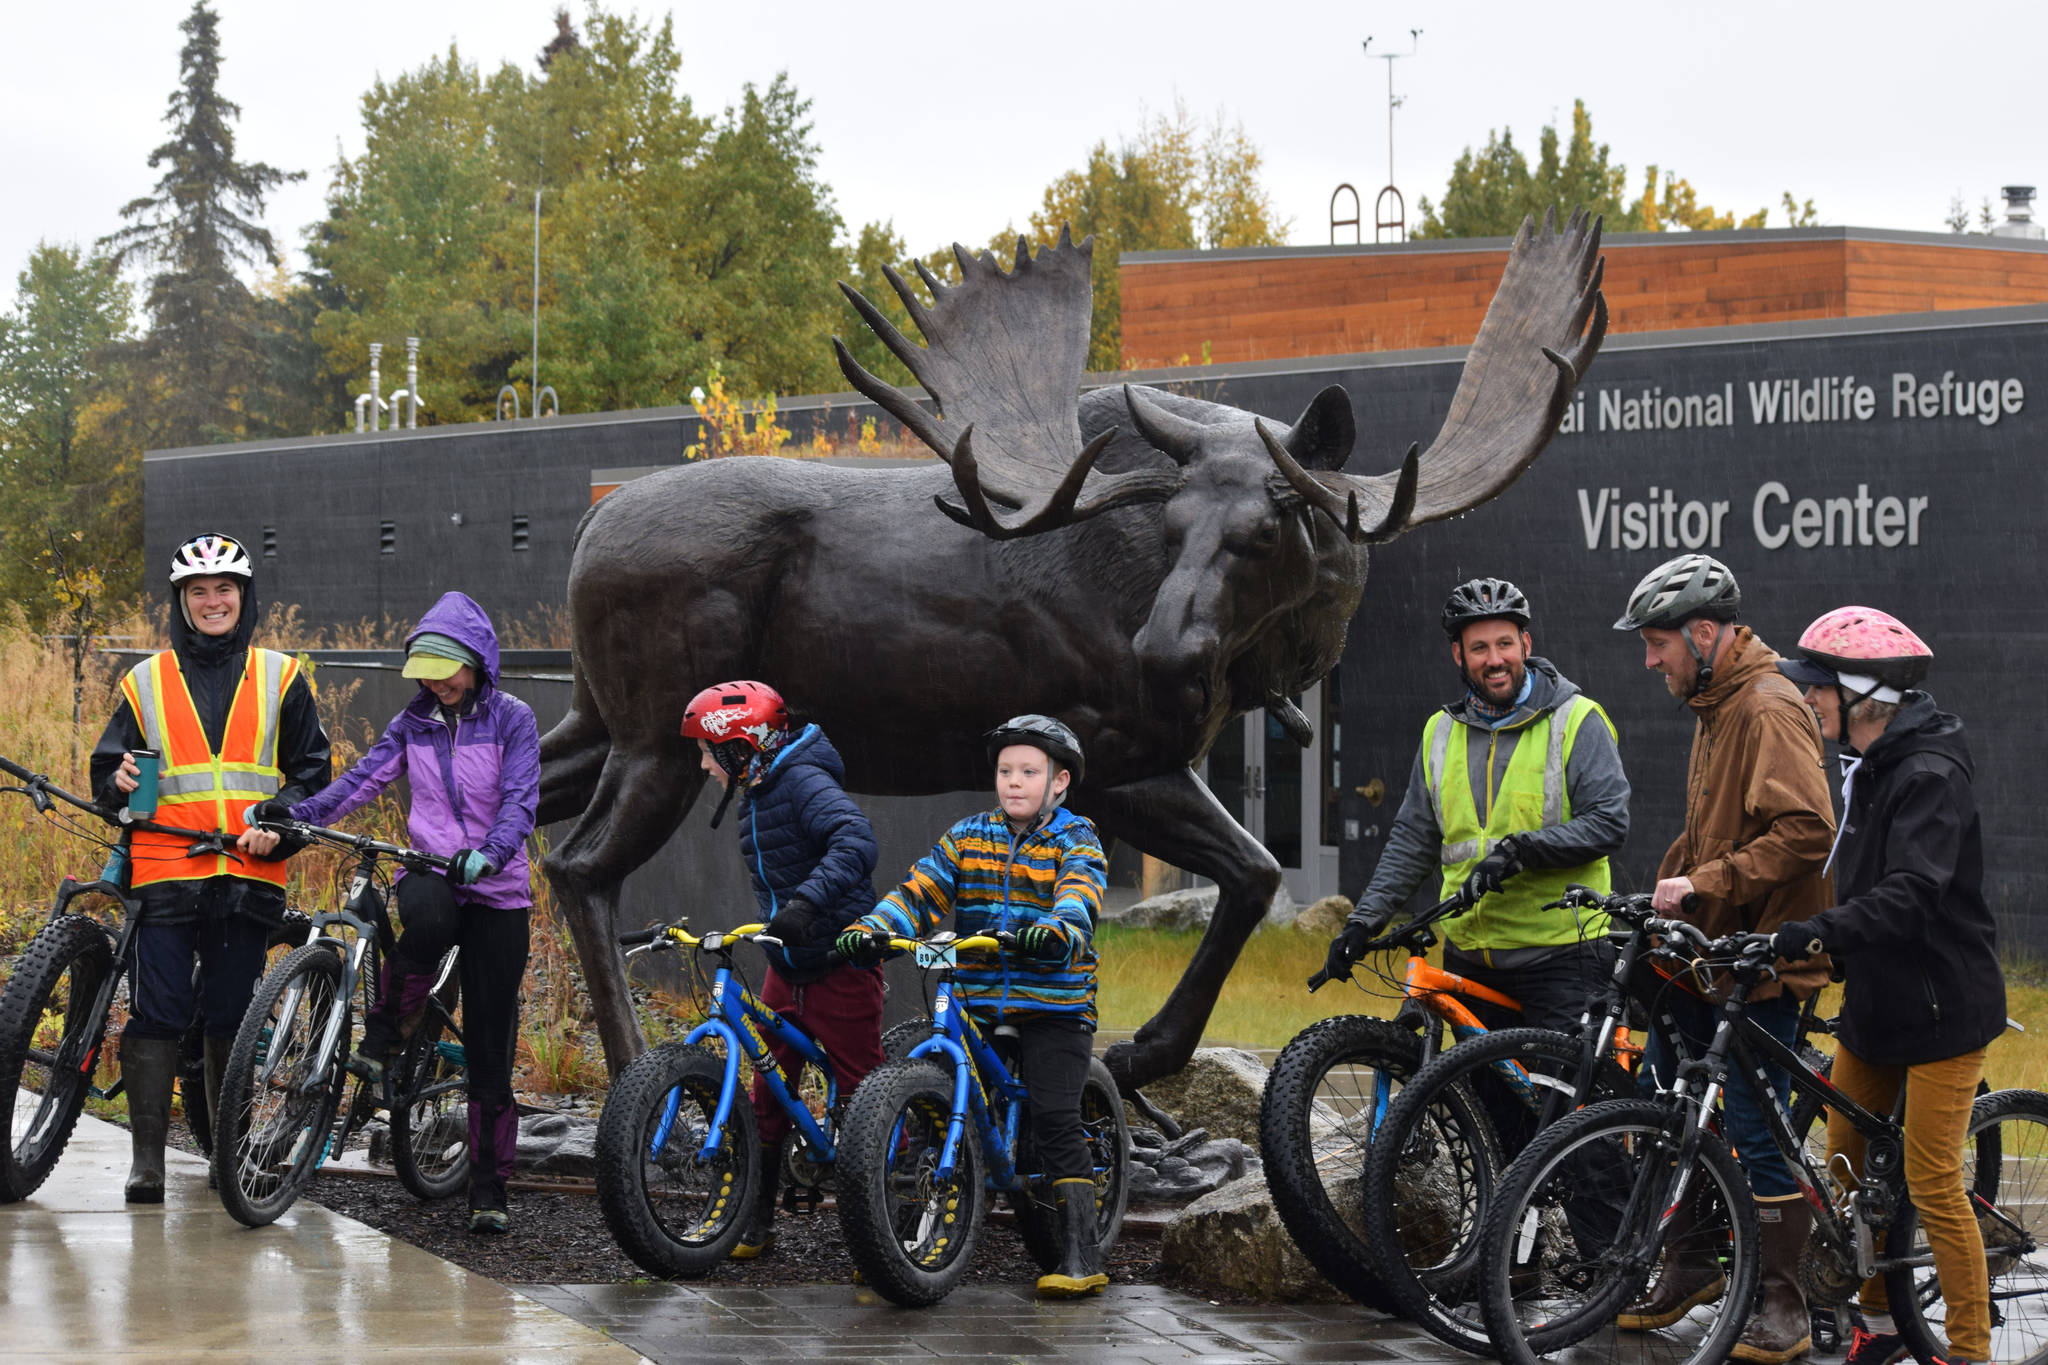 Kaitlin Vadla (far left) prepares to lead a group of bike riders on a trail ride at the Kenai National Wildlife Refuge Visitor Center on Saturday, Sept. 26 just outside Soldotna, Alaska.                                Kaitlin Vadla (far left) prepares to lead a group of bike riders on a trail ride at the Kenai National Wildlife Refuge Visitor Center on Saturday, Sept. 26 just outside Soldotna, Alaska.